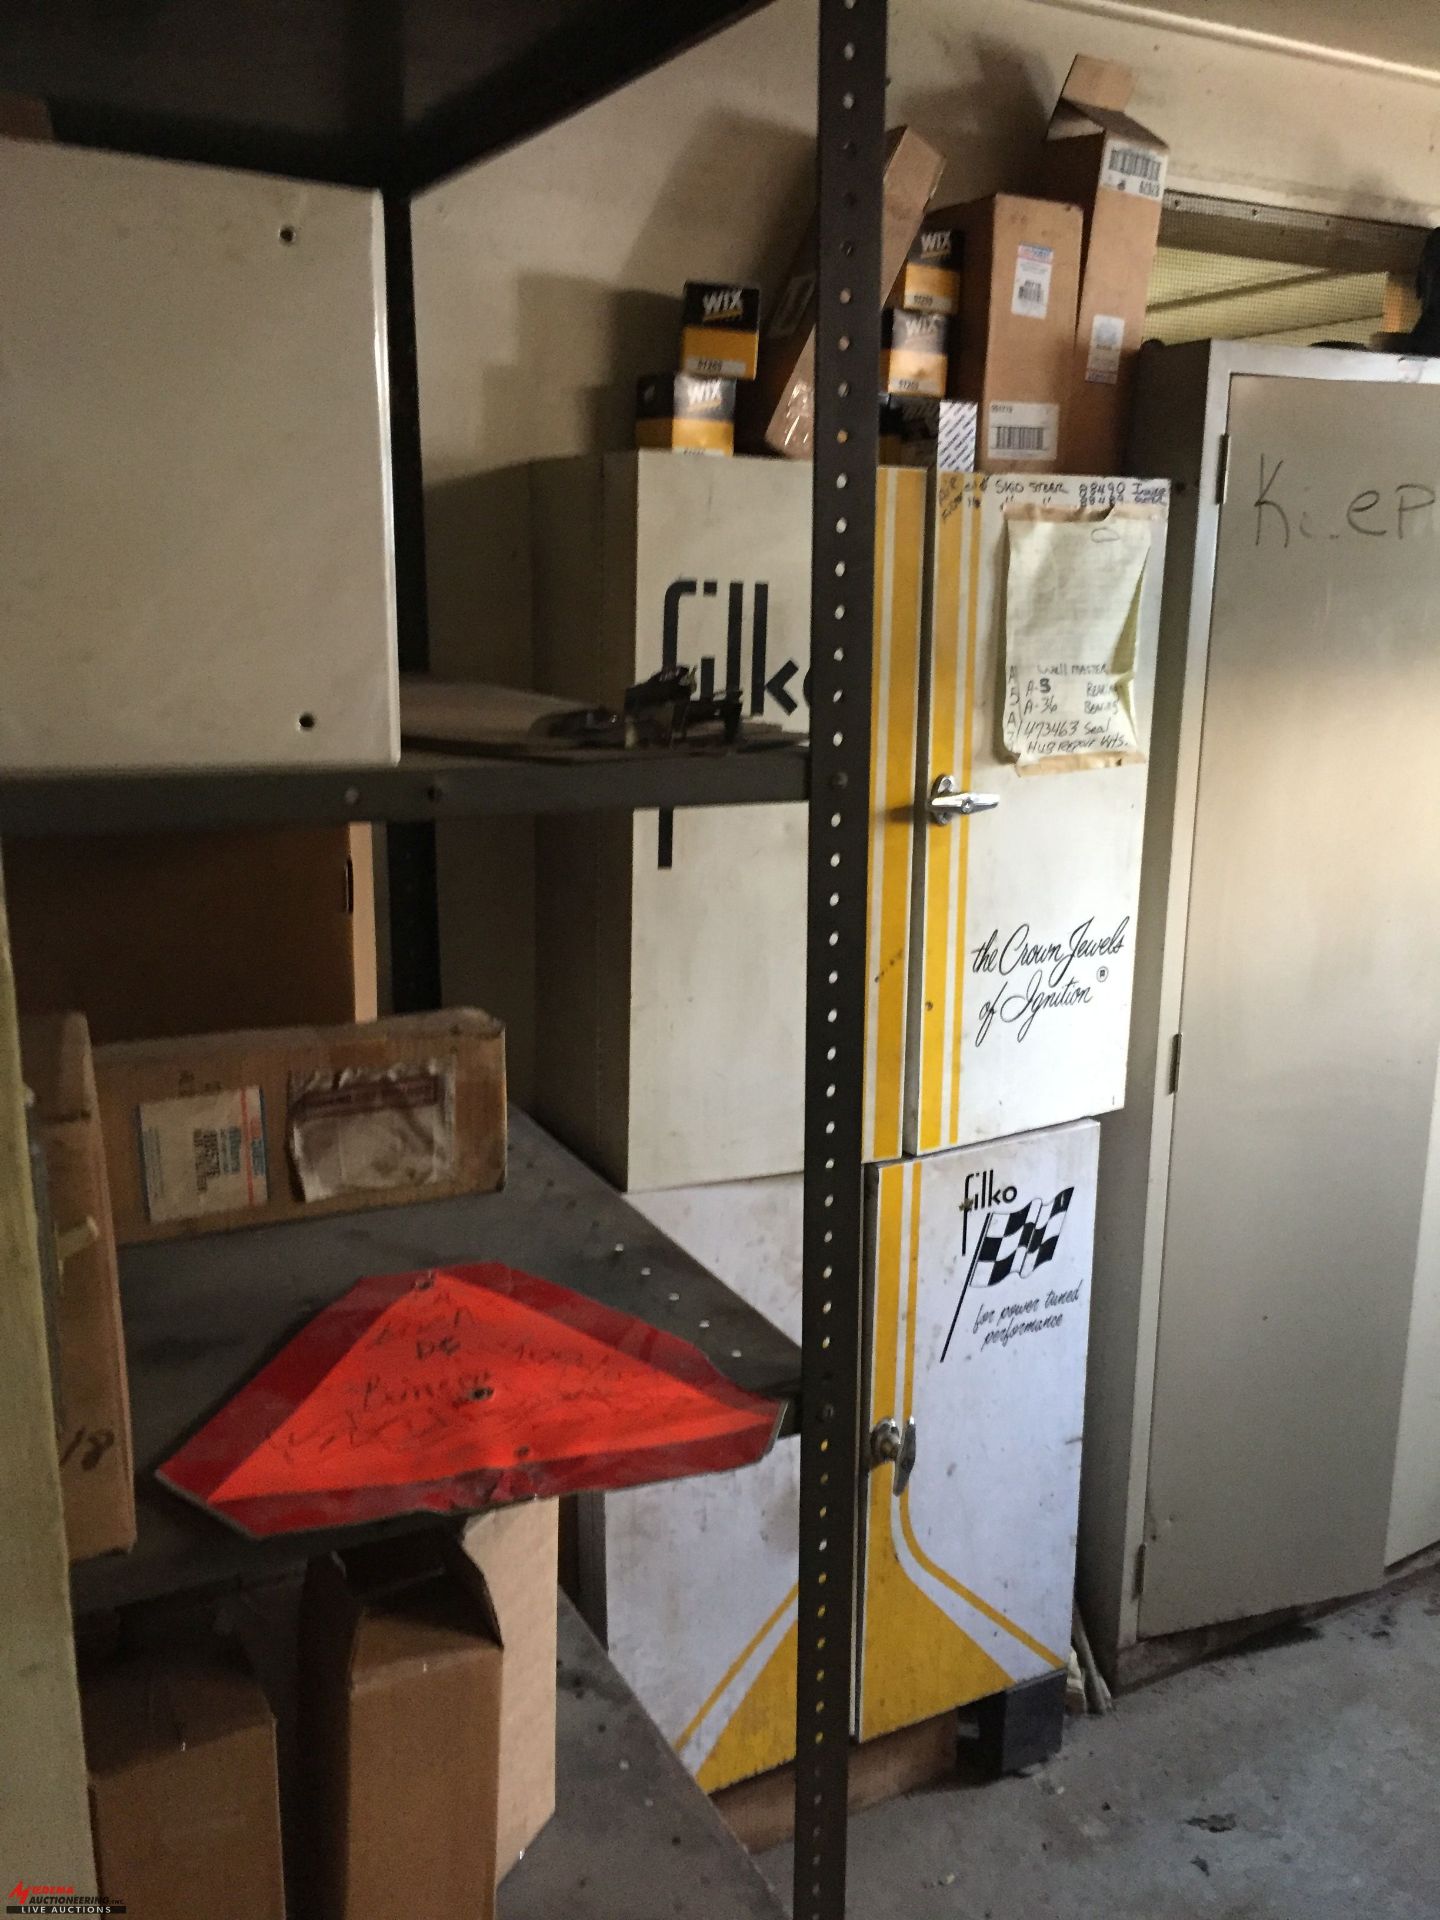 ASSORTED PARTS, METAL CABINETS, FILTERS, GASKETS, LIGHTS AND MORE [LOCATION: SOUTH SHOP AT MAIN